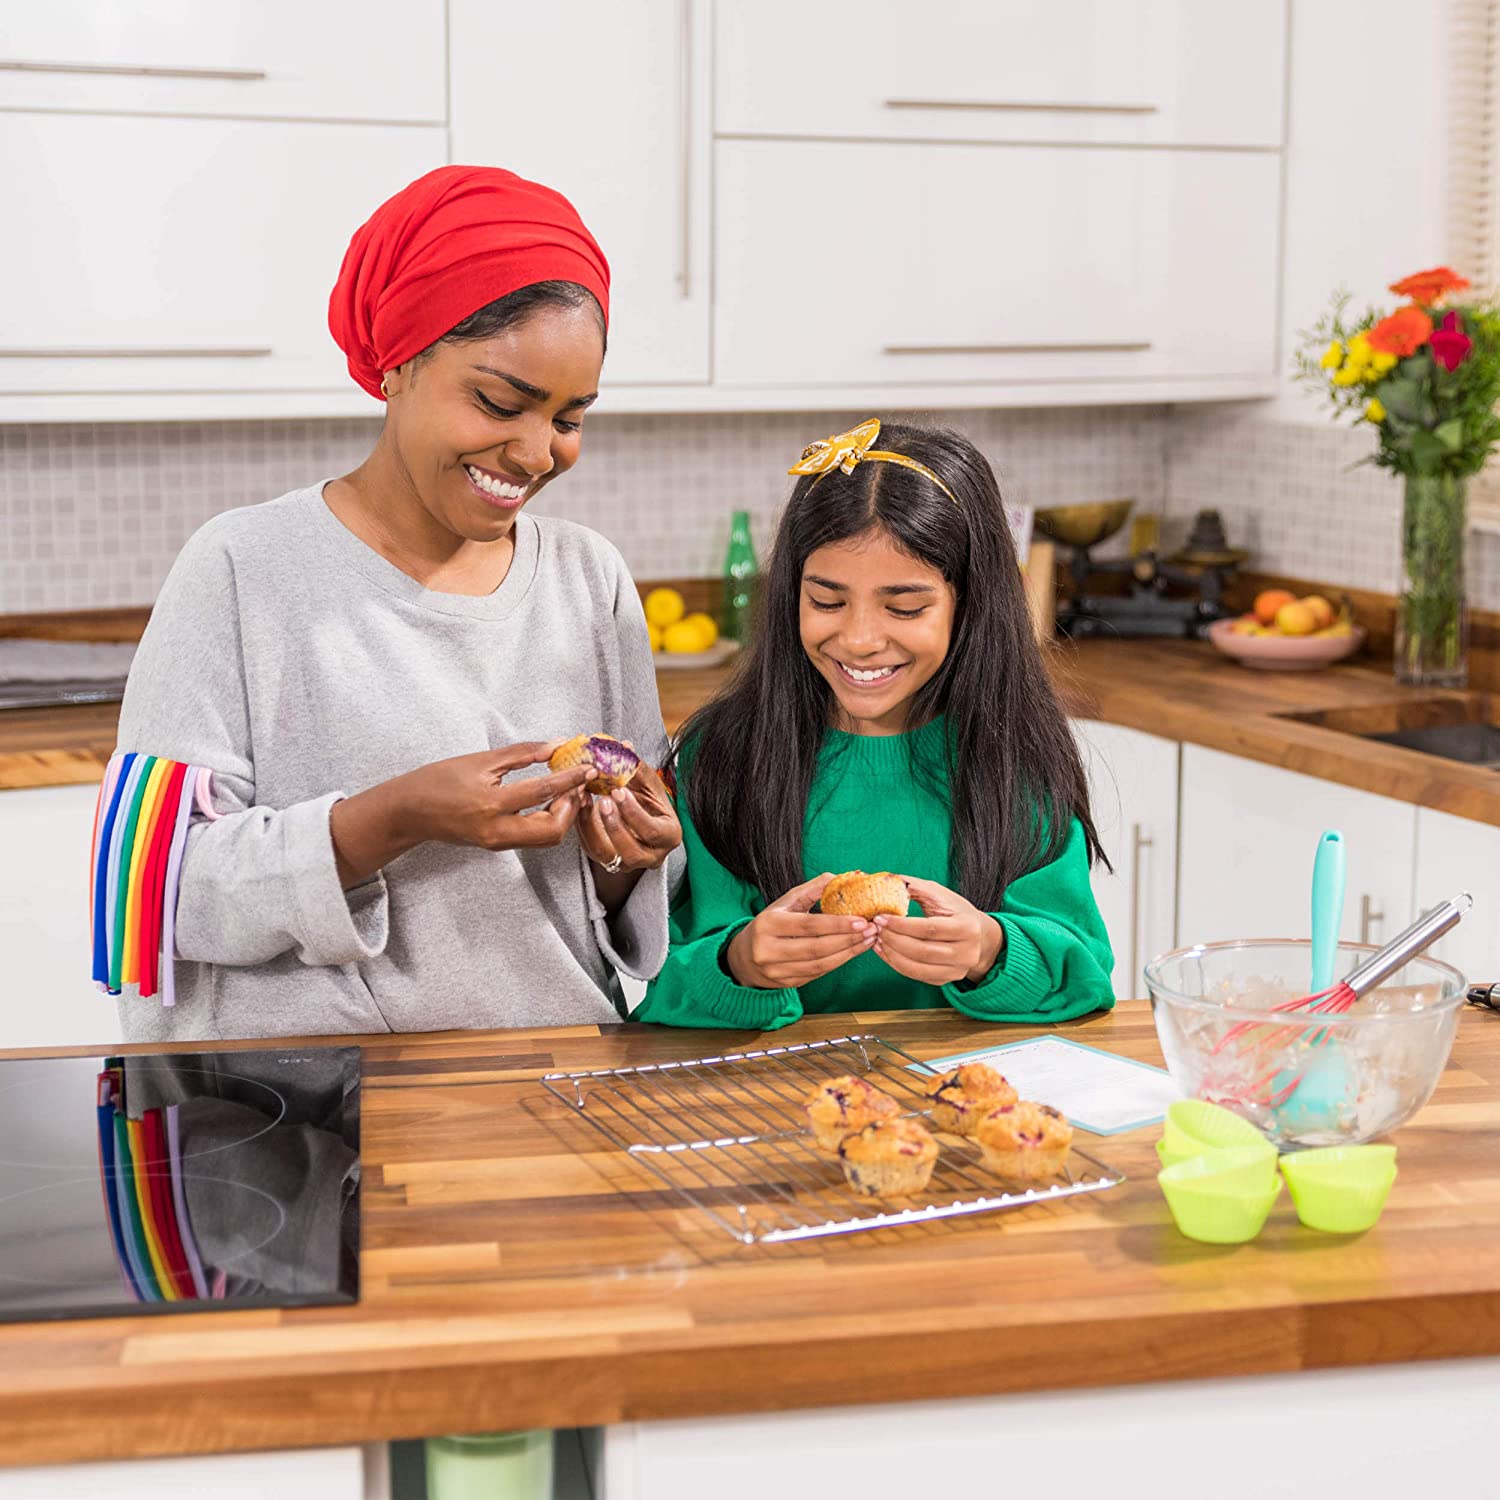 Making Delicious Welsh Cakes With Nadiya's Deluxe Kids Baking Sets